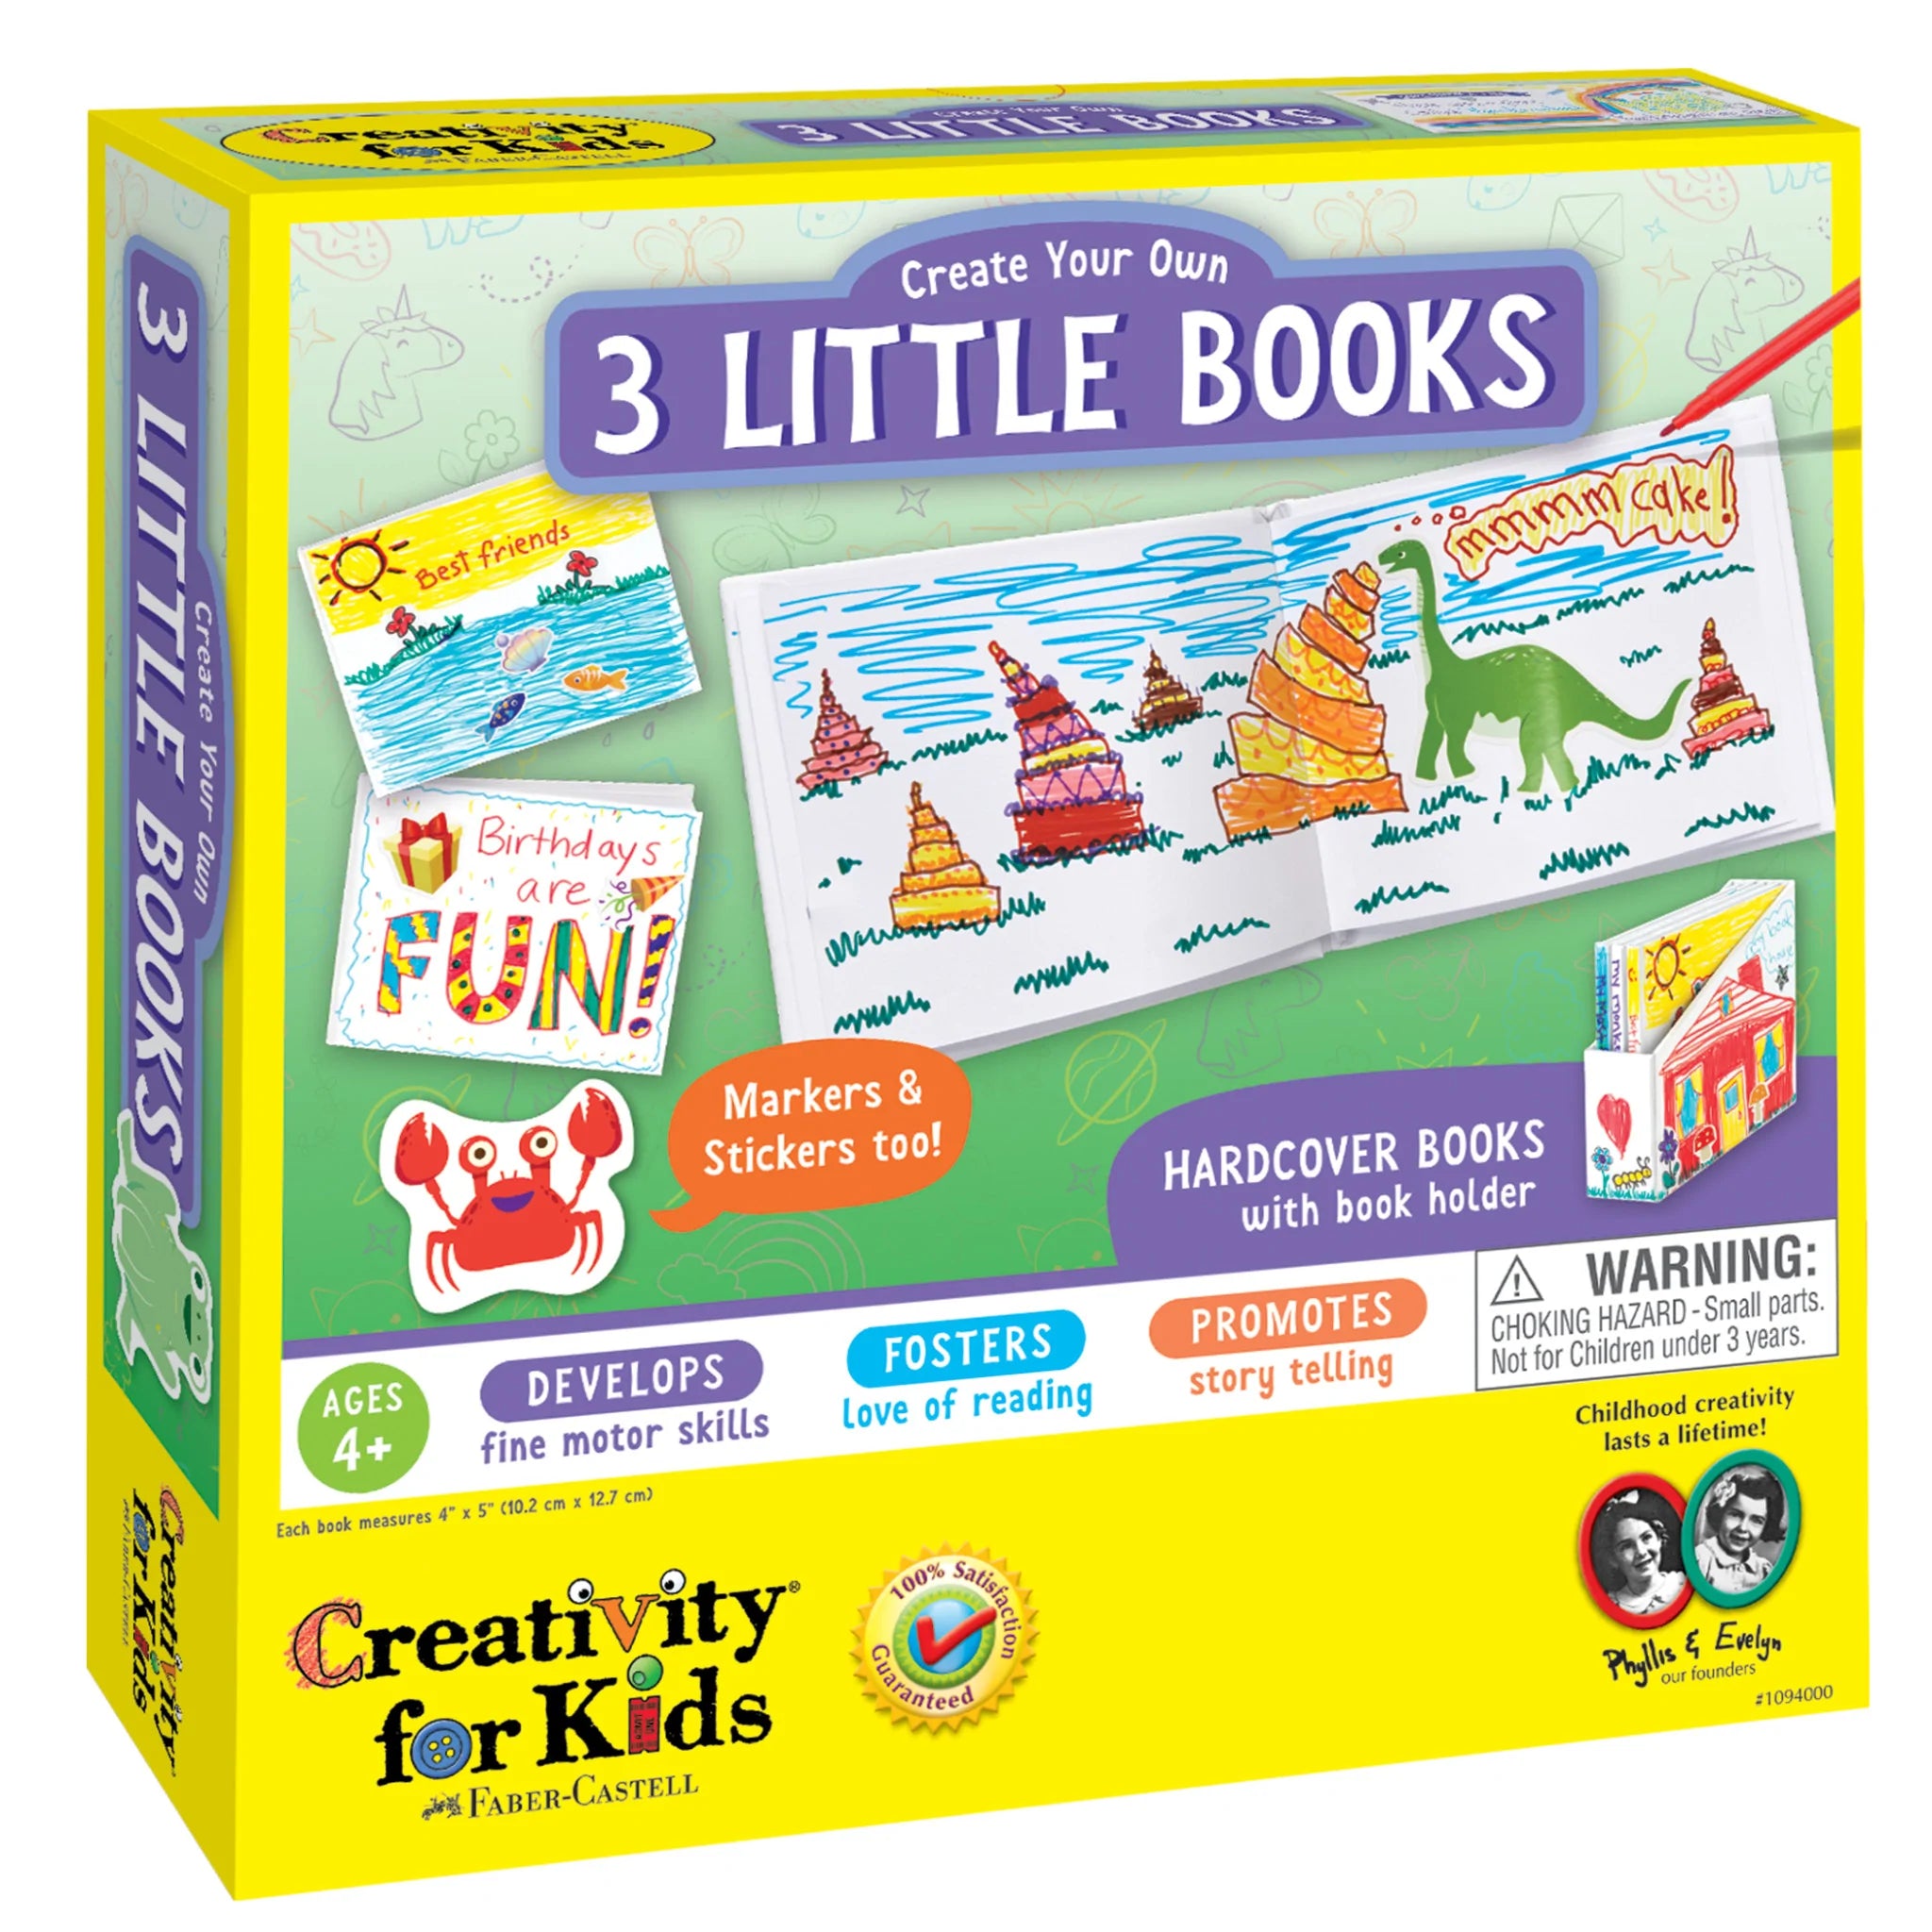 Create Your Own 3 Little Books - Ages 4+